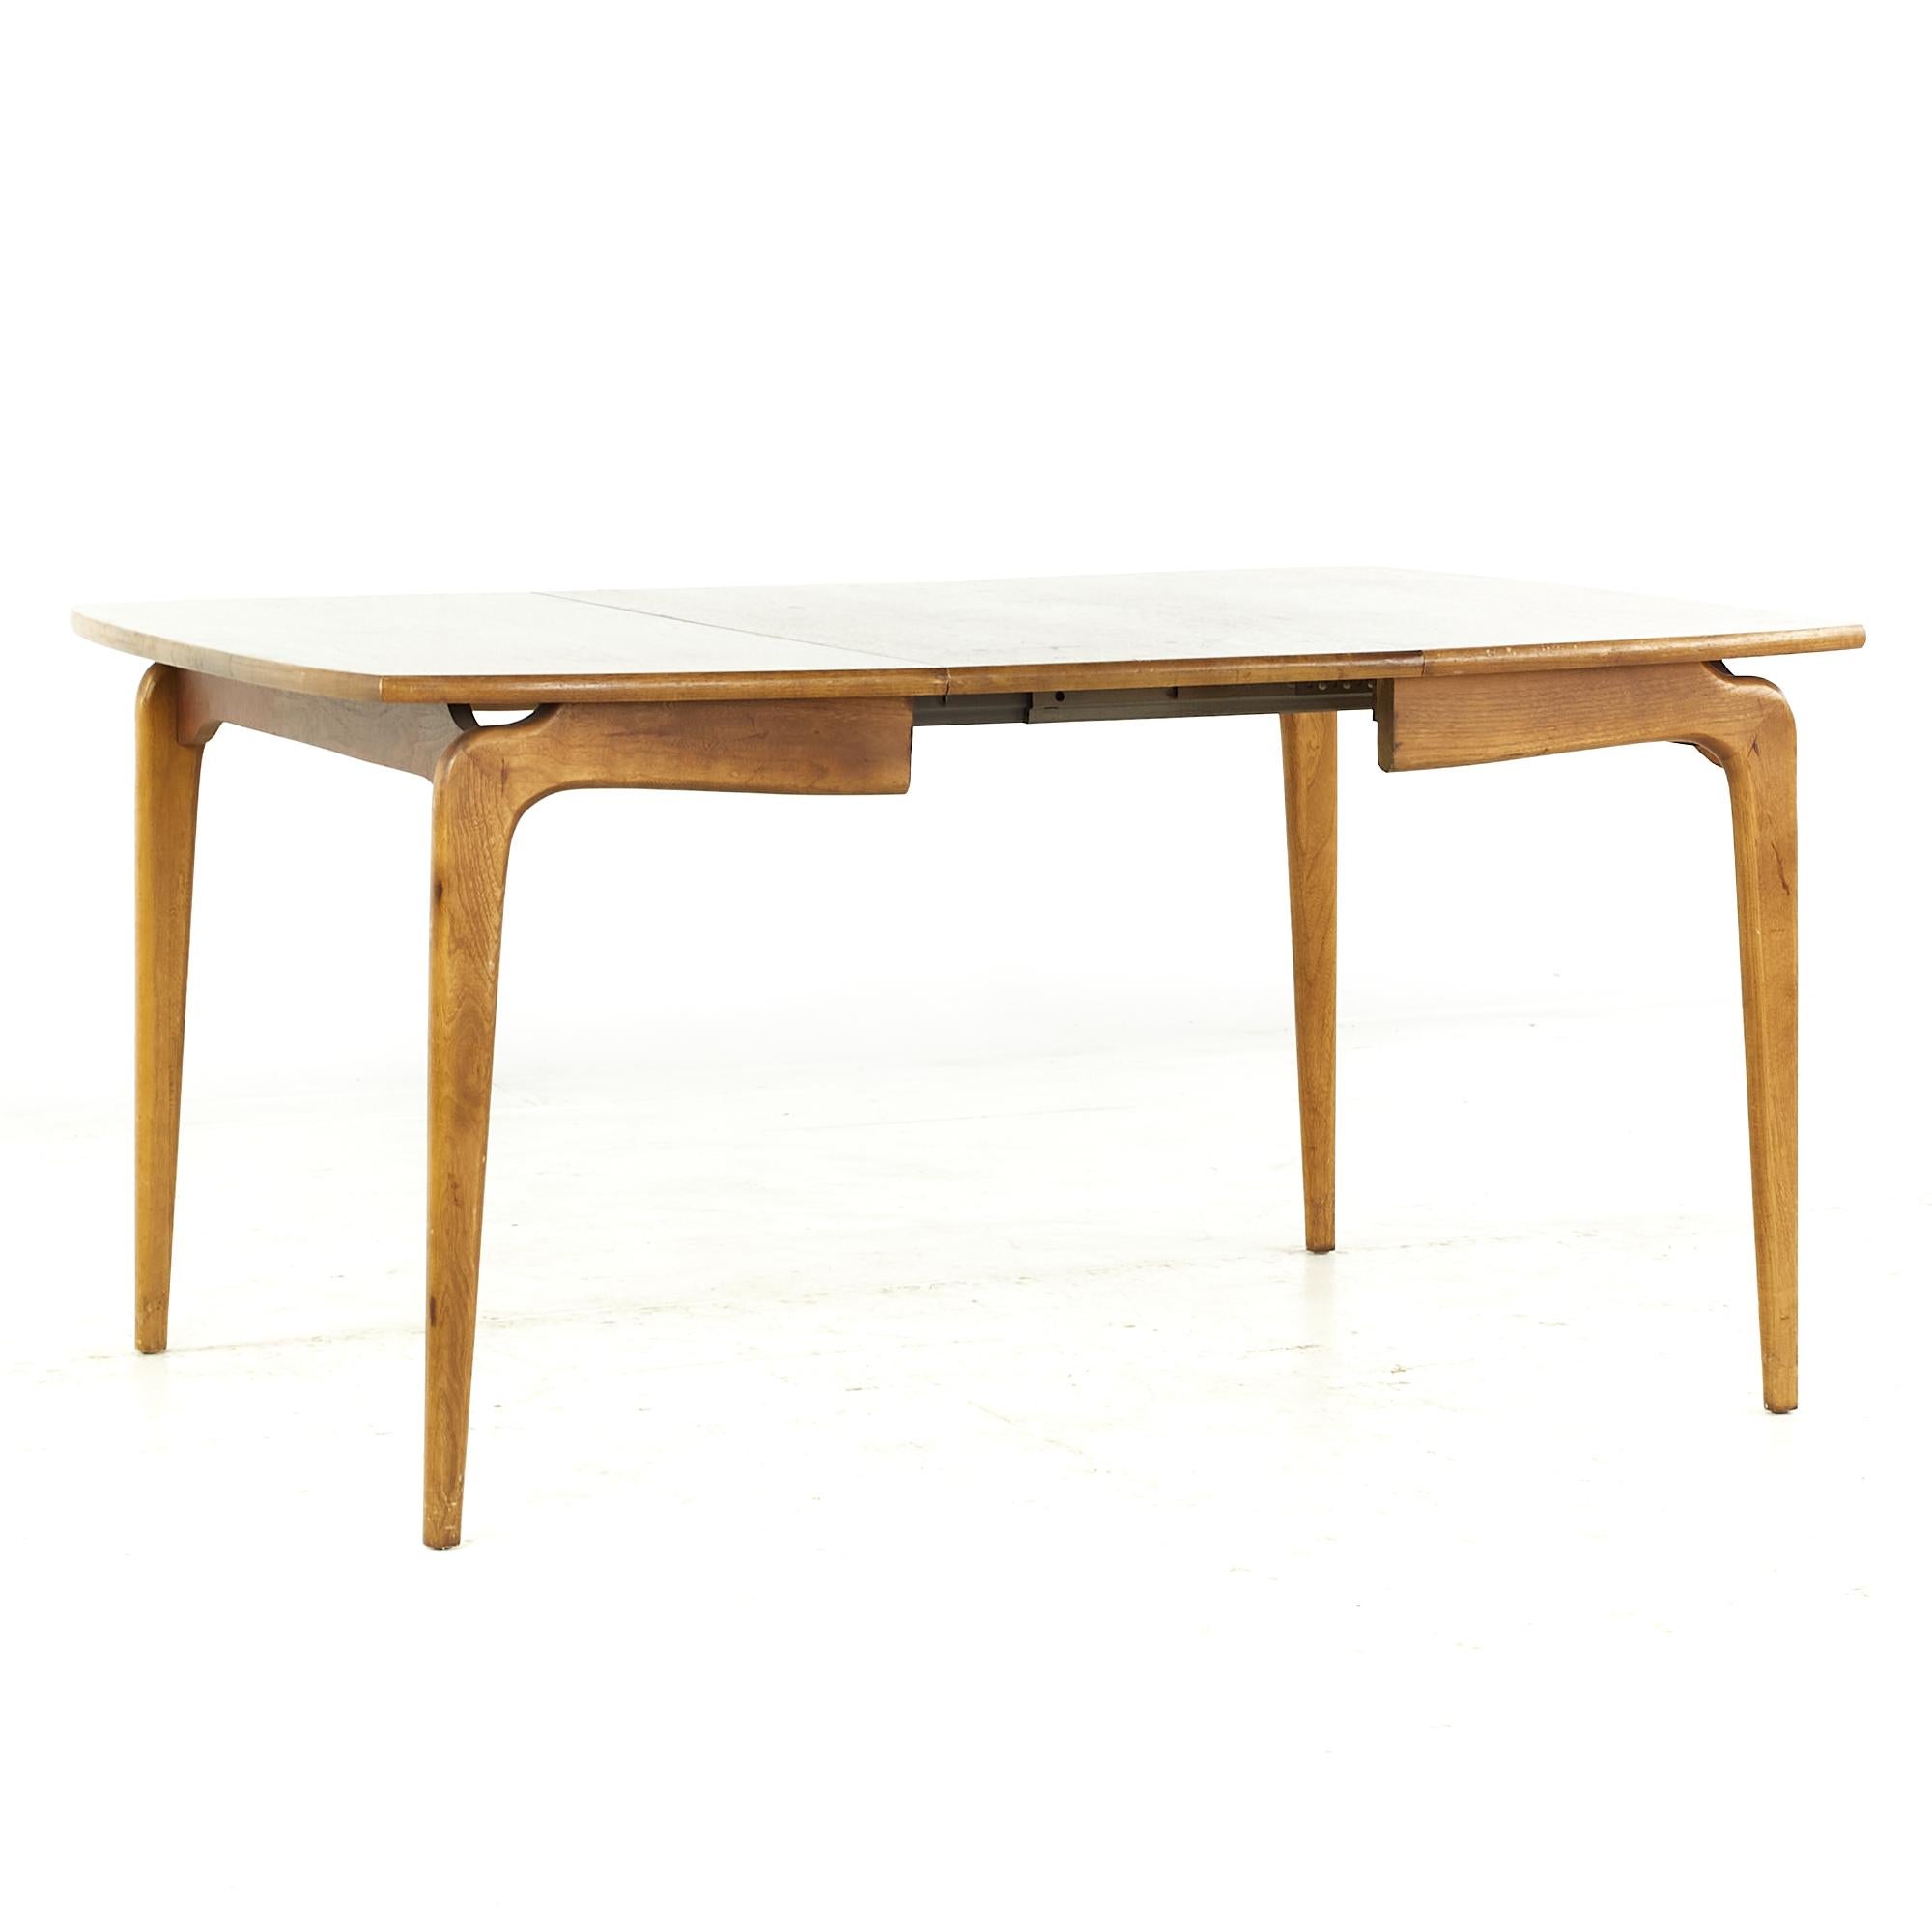 Late 20th Century Lane Perception Midcentury Walnut Expanding Dining Table with 2 Leaves For Sale